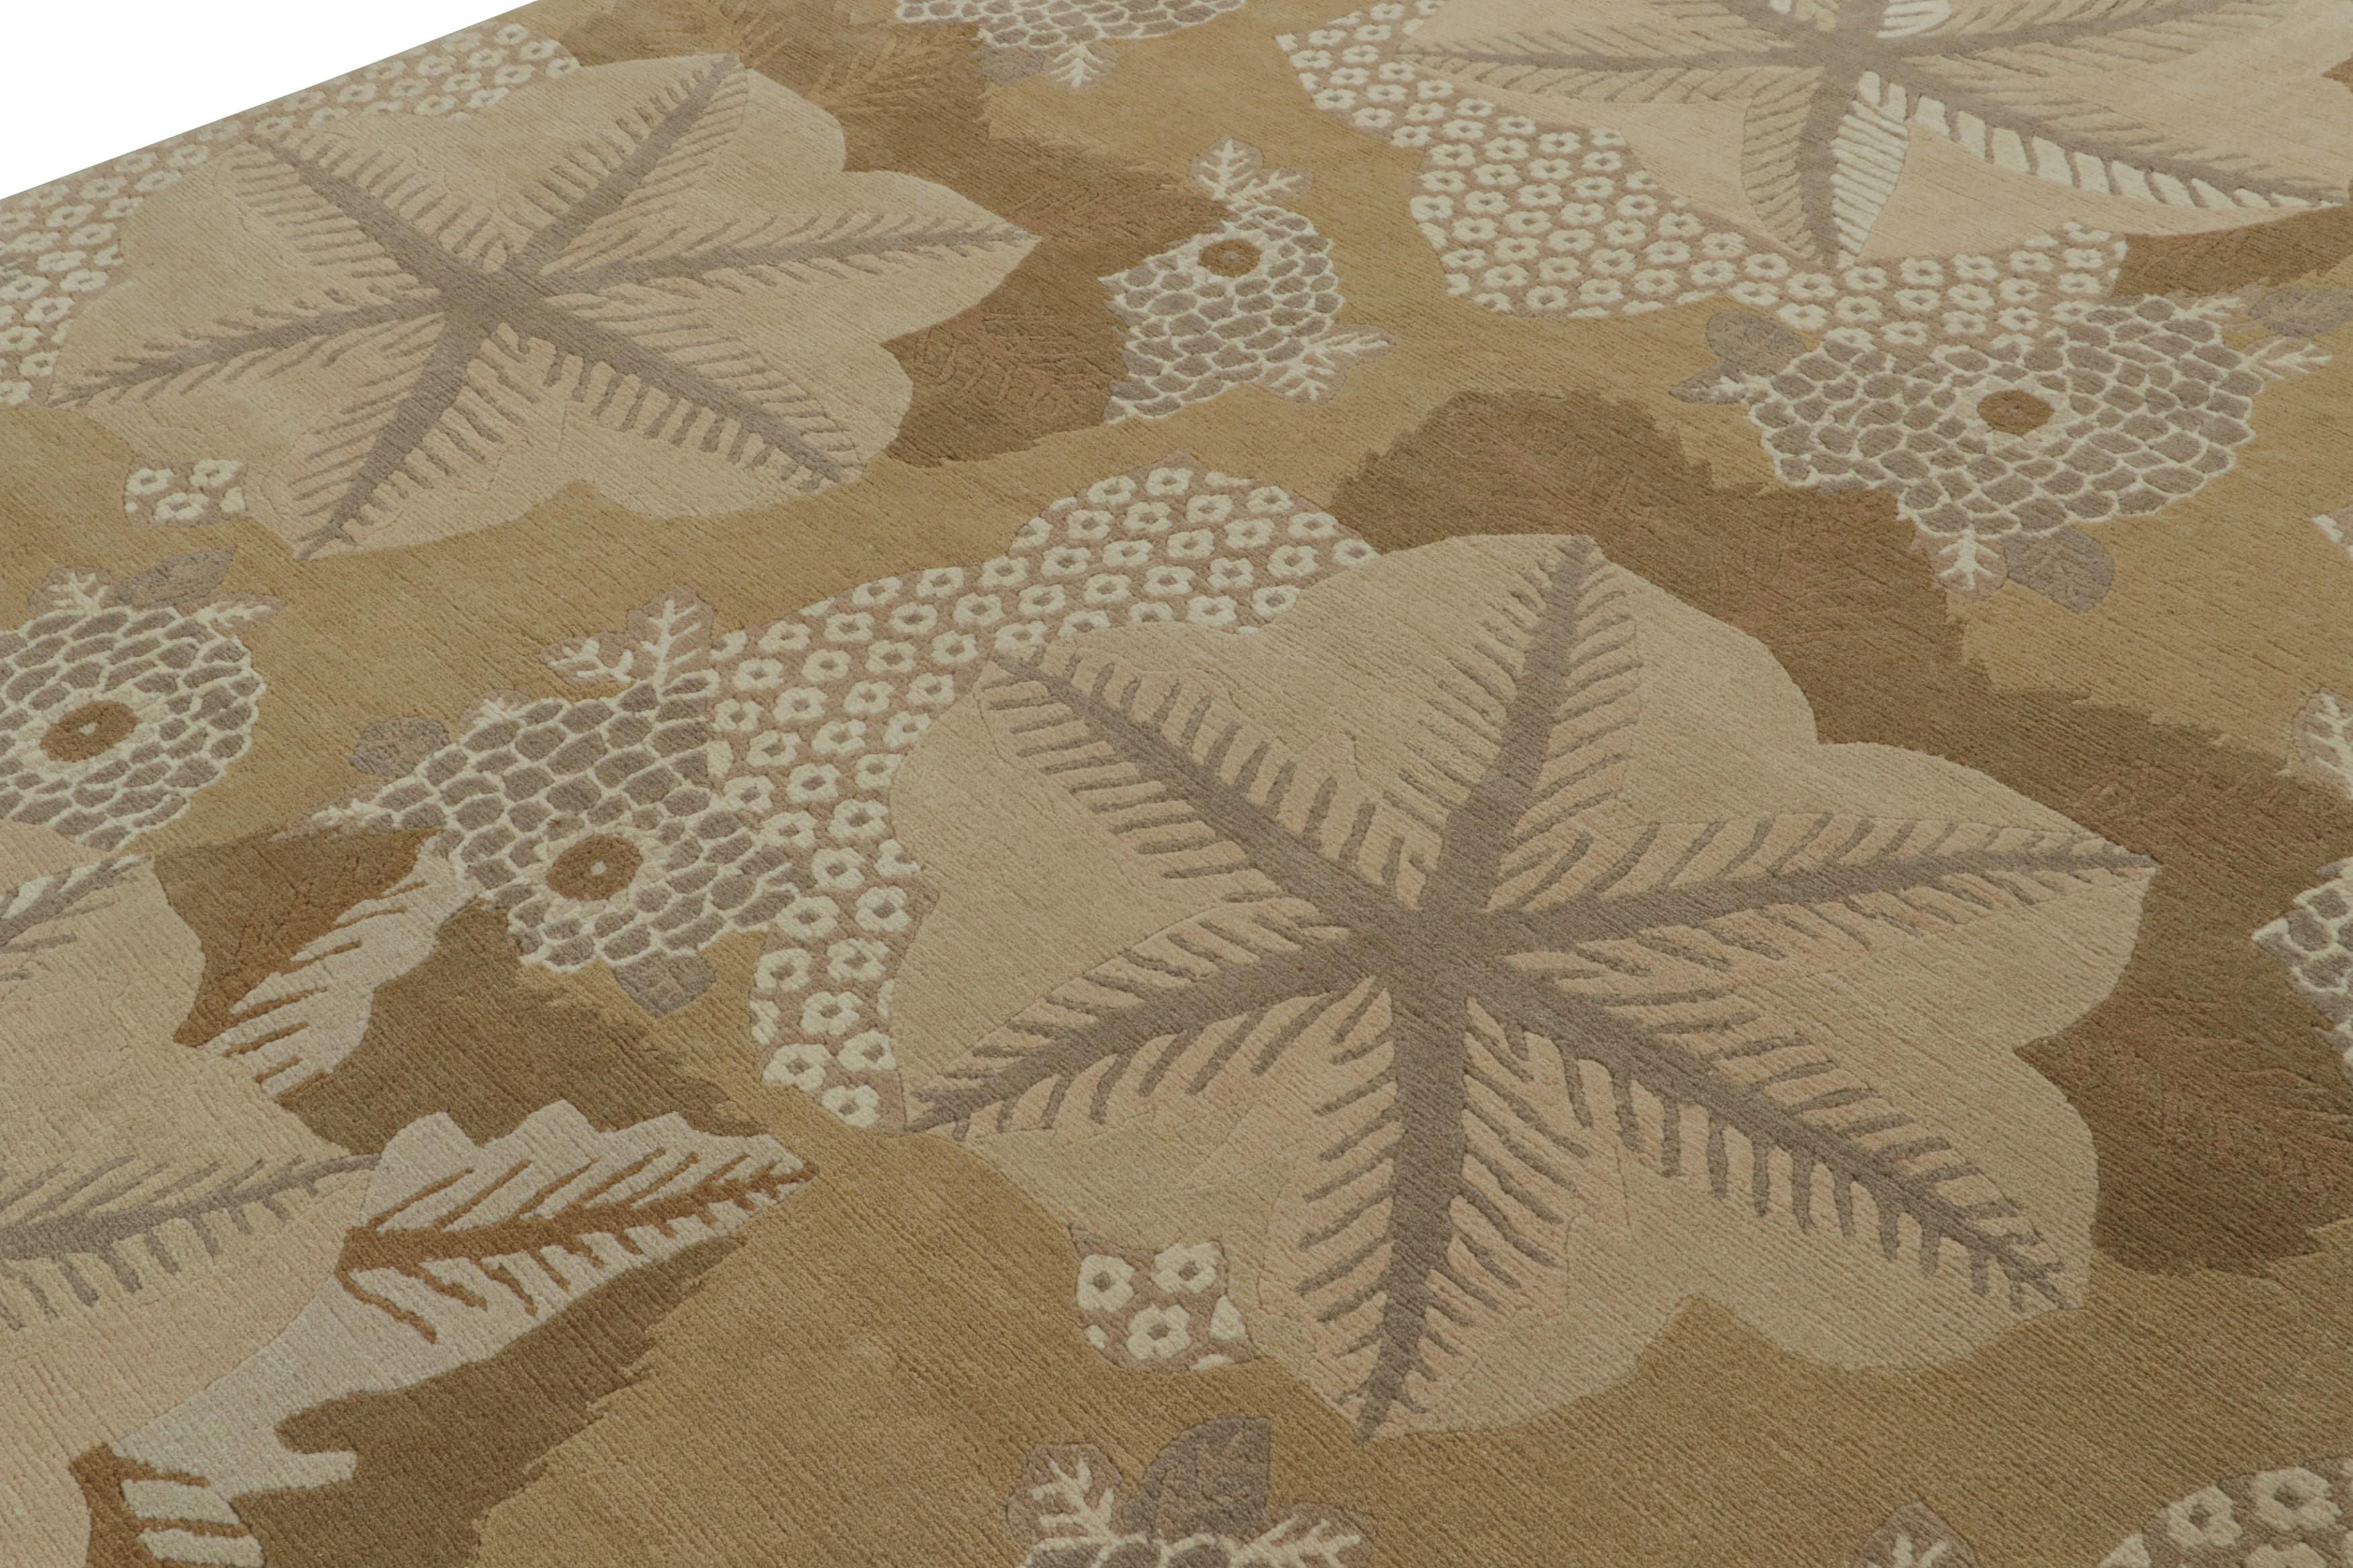 Hand-Knotted Rug & Kilim’s “Clouds” Modern Rug Design in Beige-brown with Floral Medallions For Sale